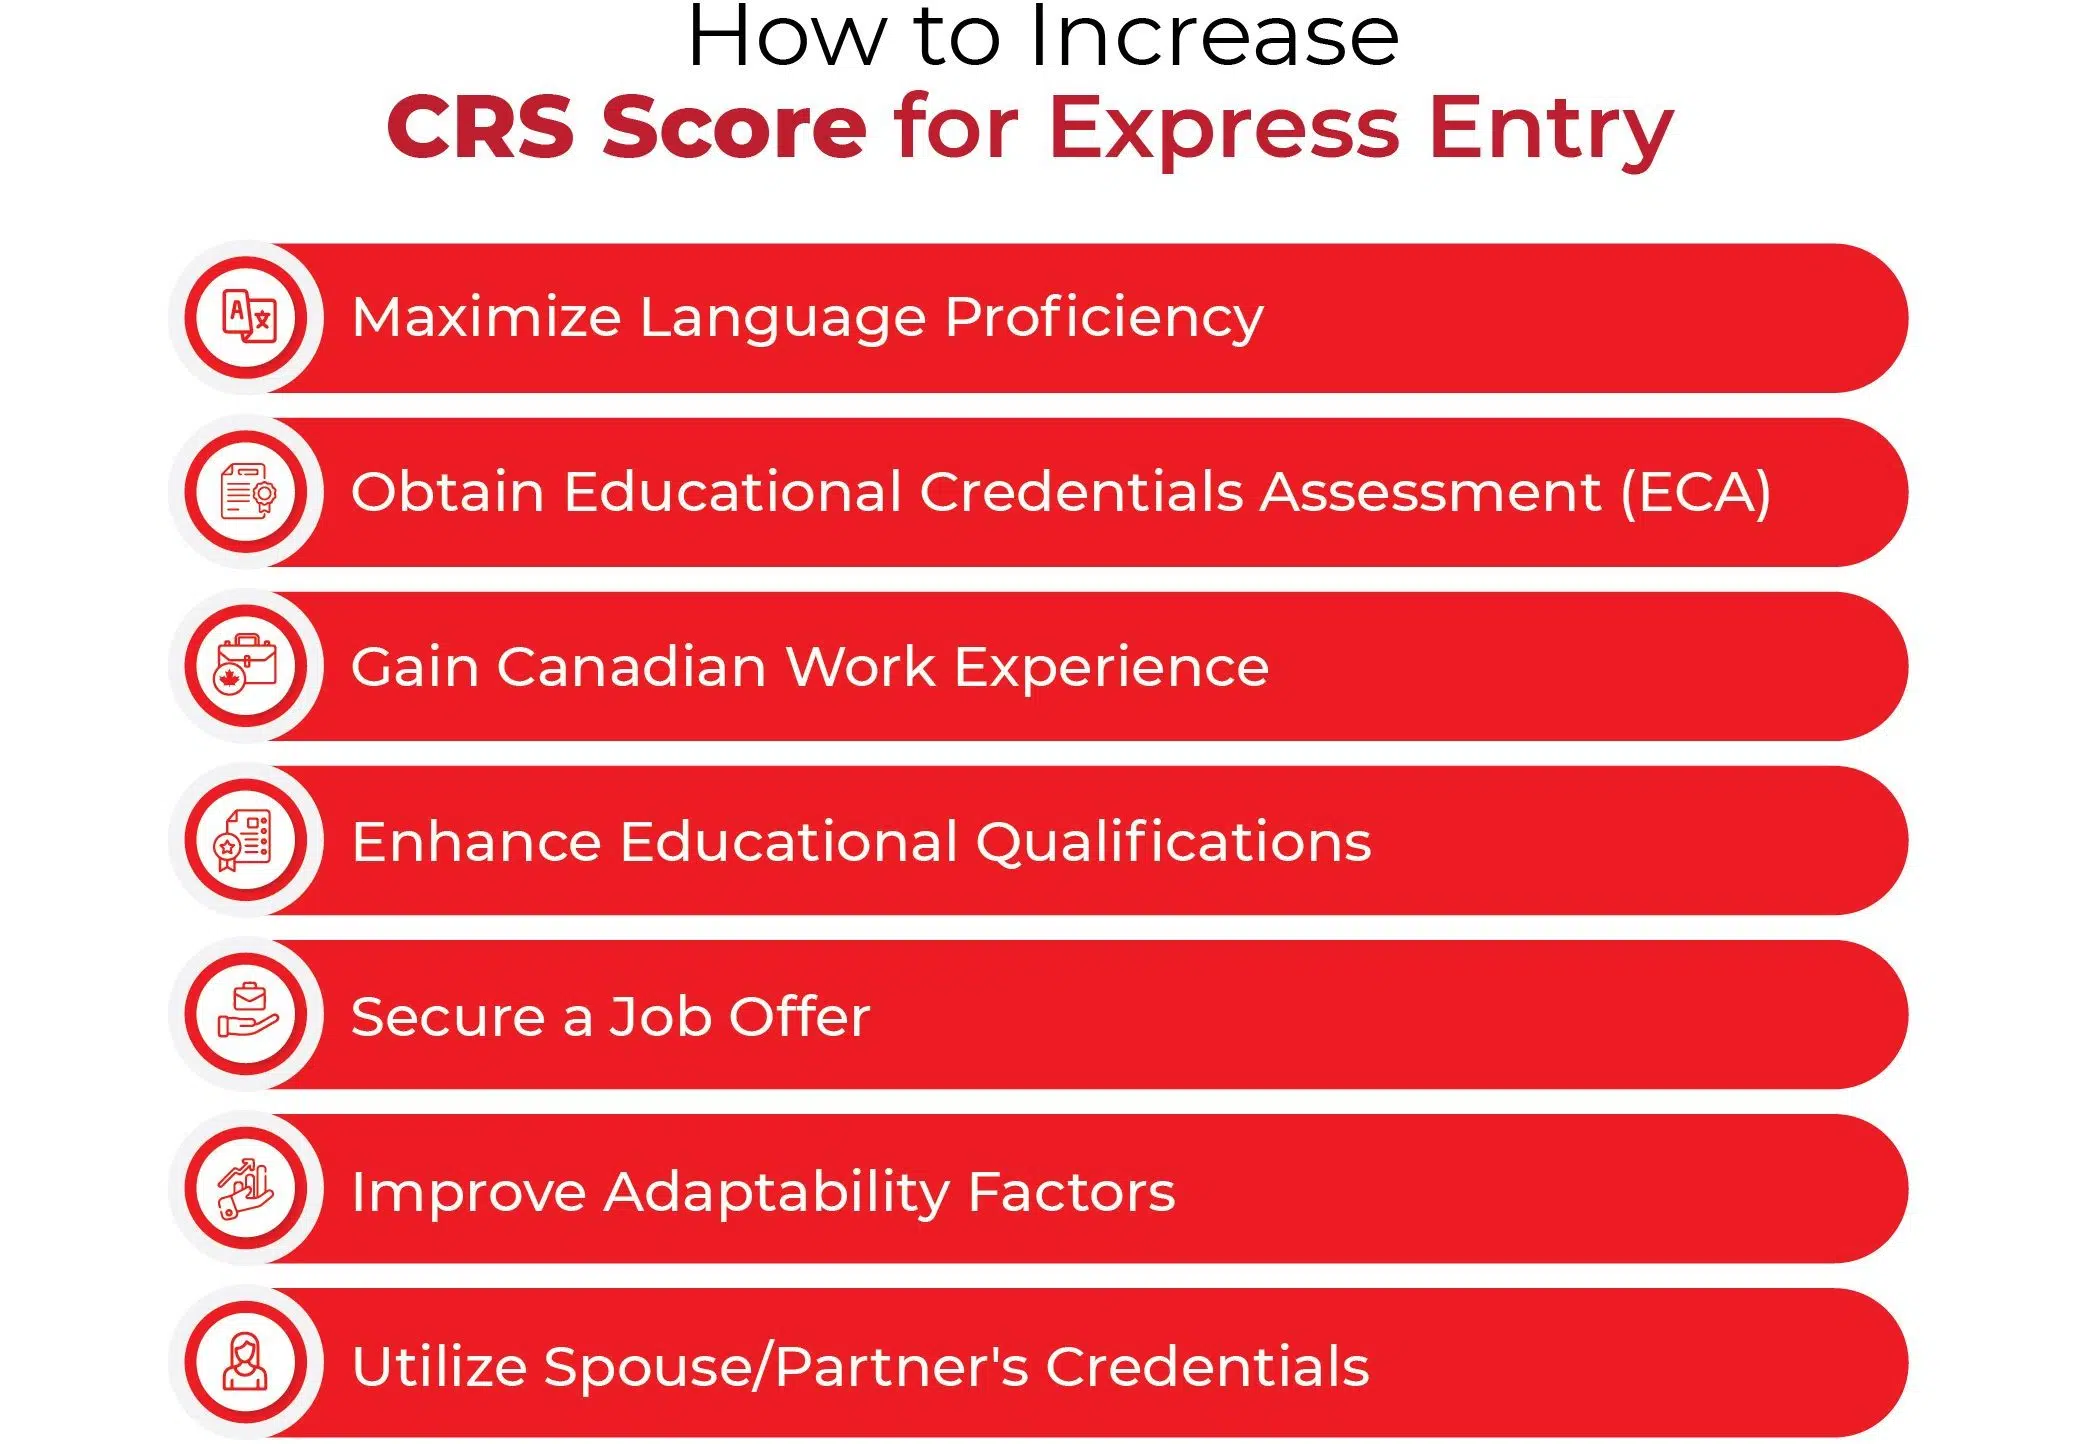 CRS Score for Express Entry